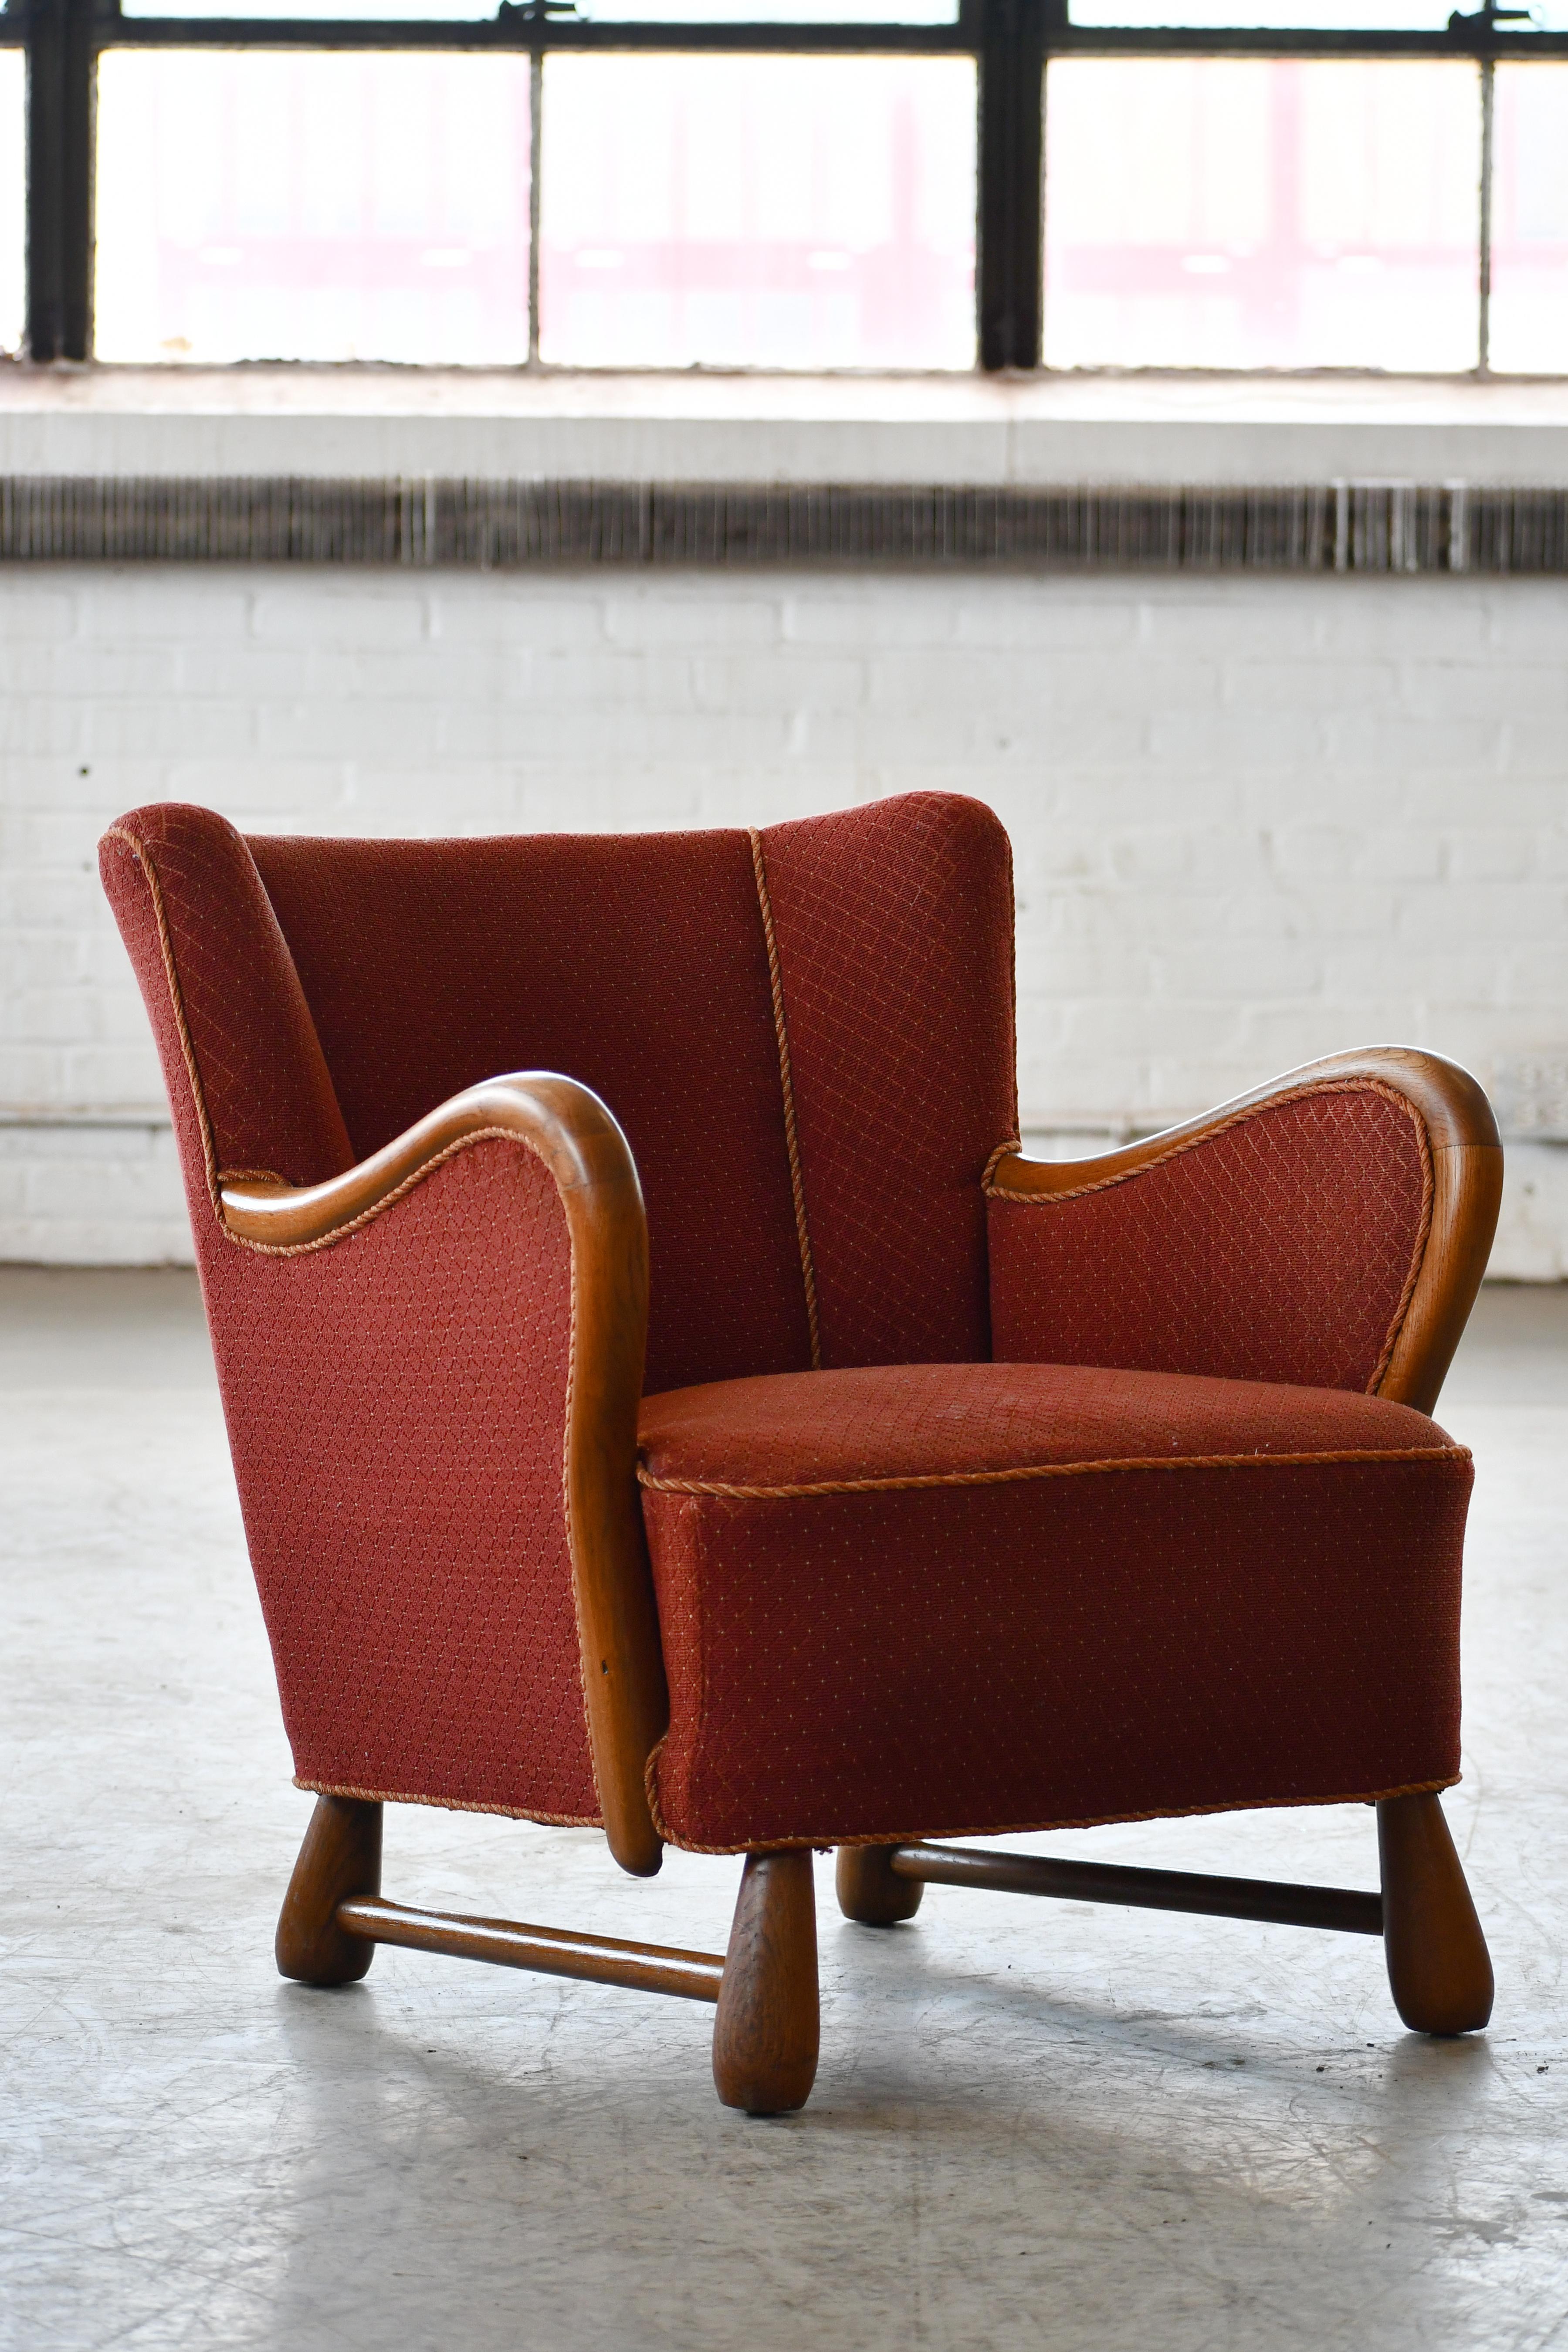 Rare Danish Easy Lounge Chair in Mahogany Attributed to Otto Færge, 1940's For Sale 7